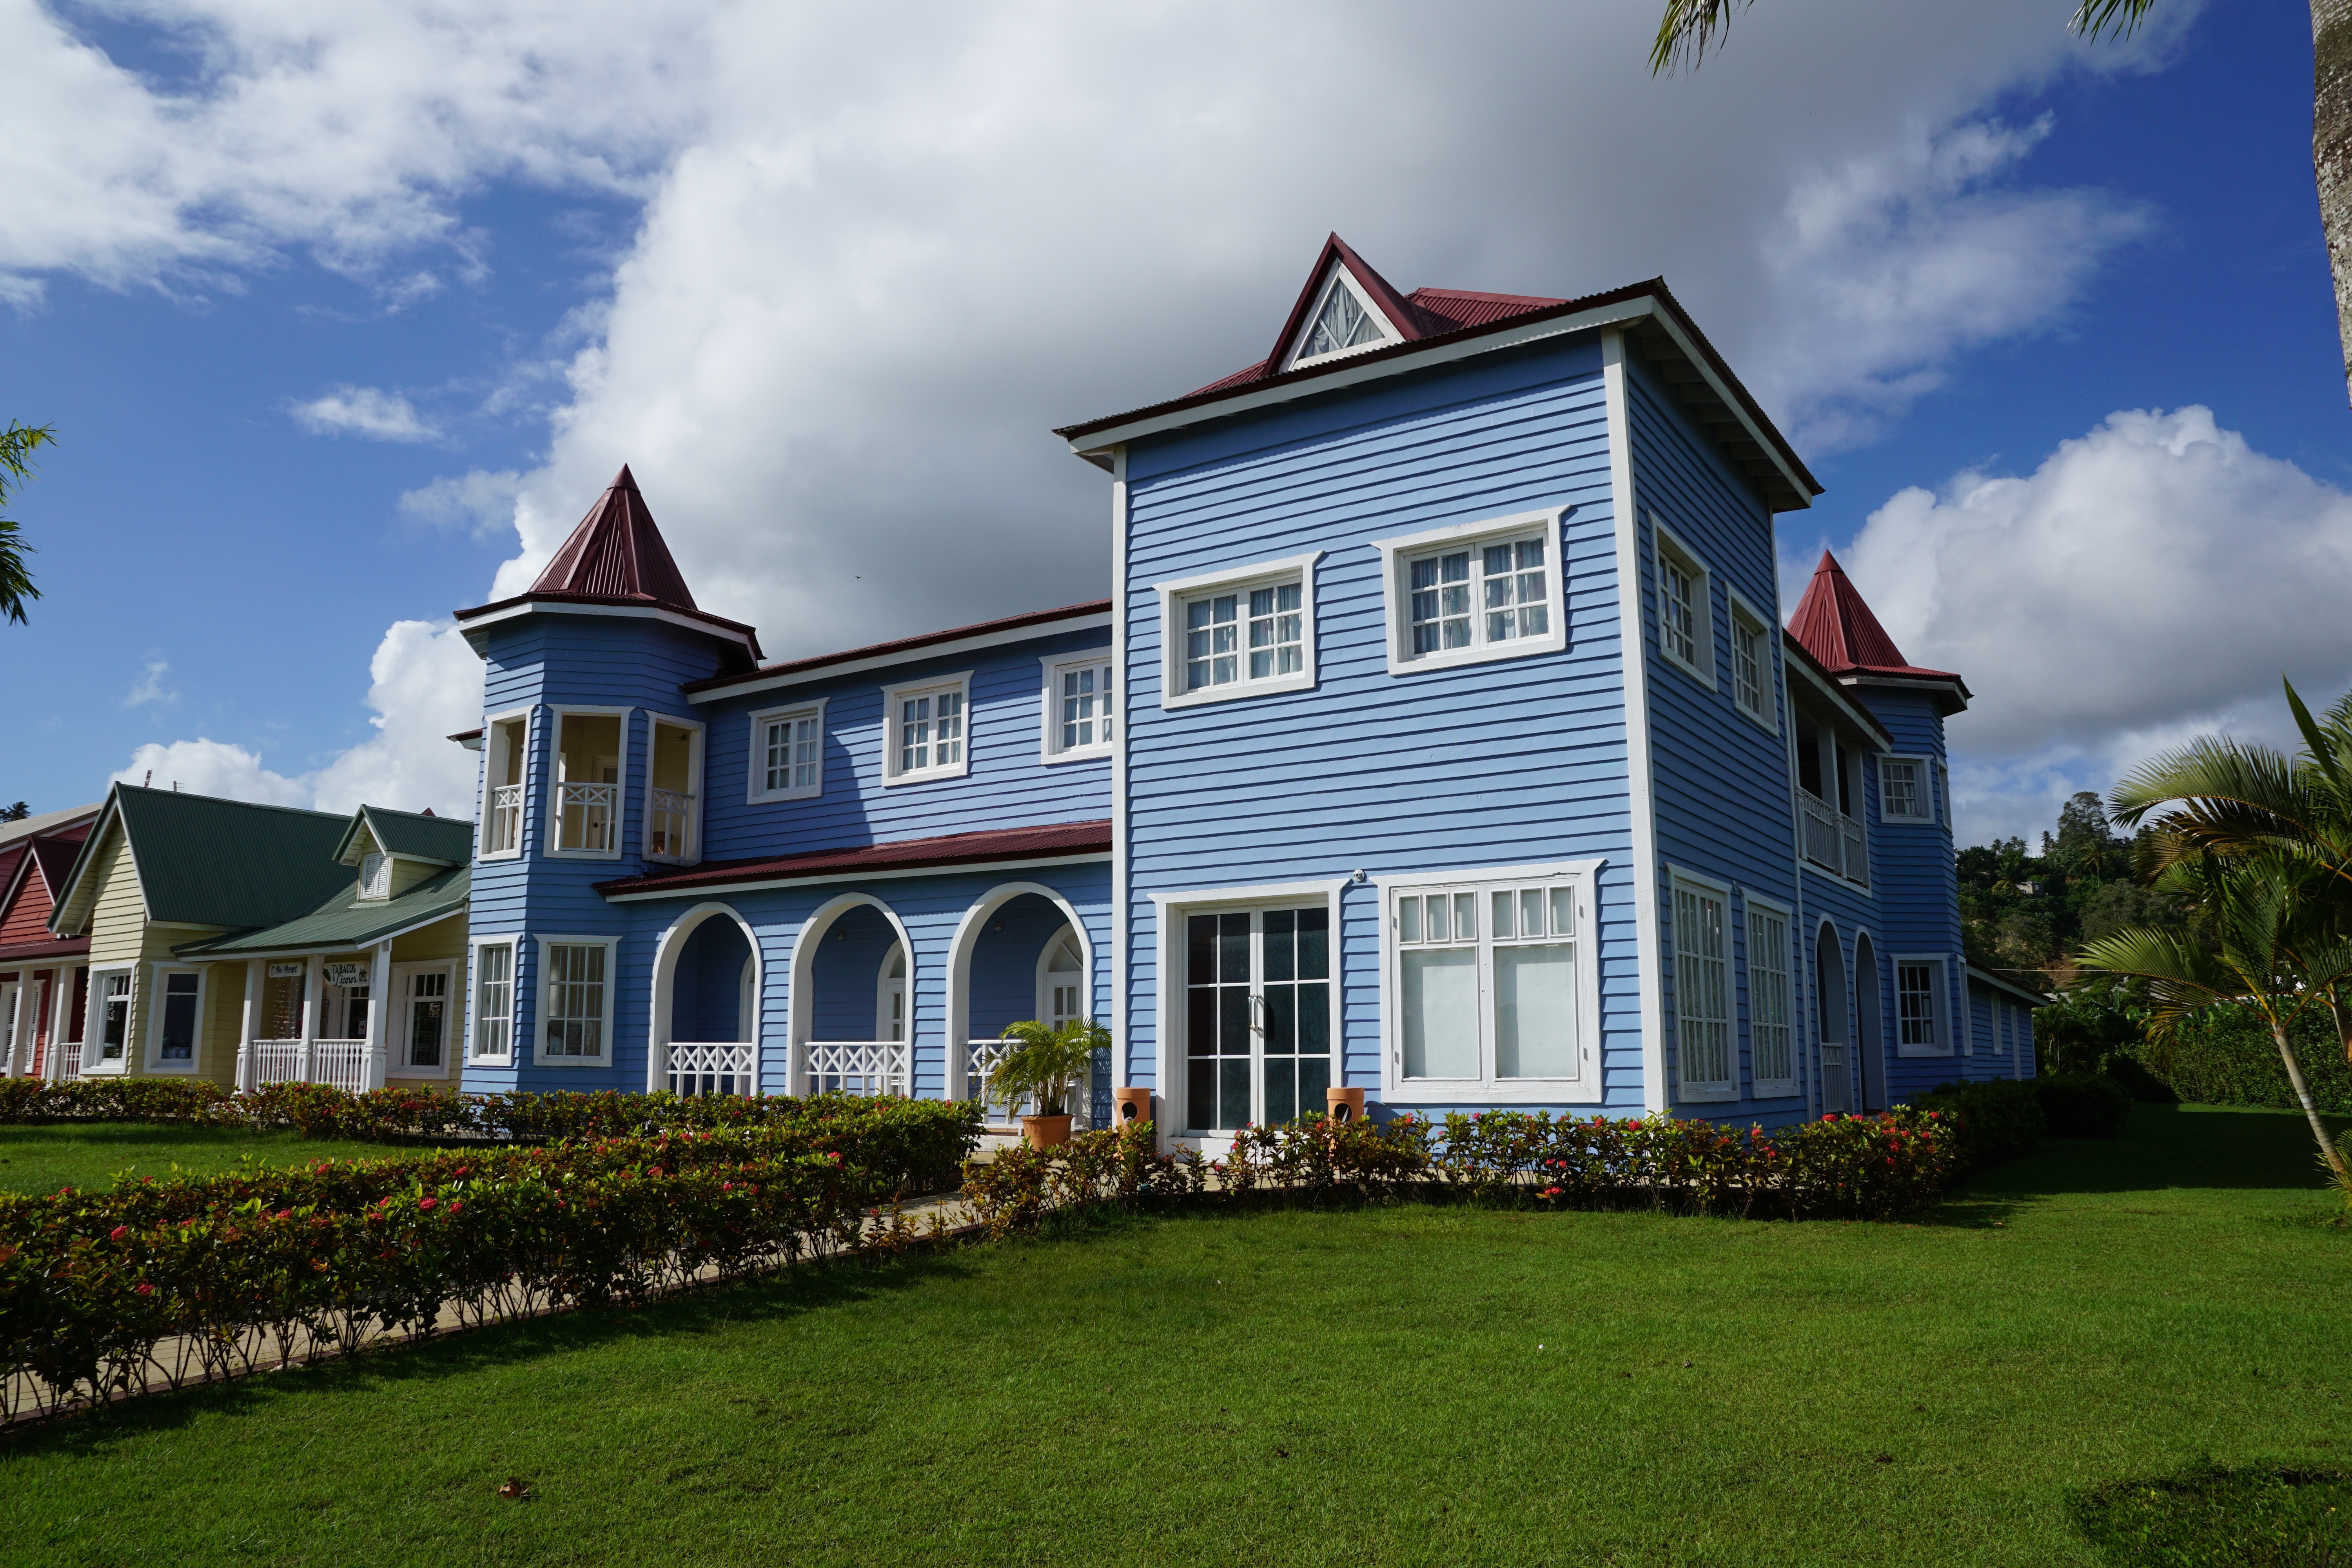 blue white and brown wooden 2 story house